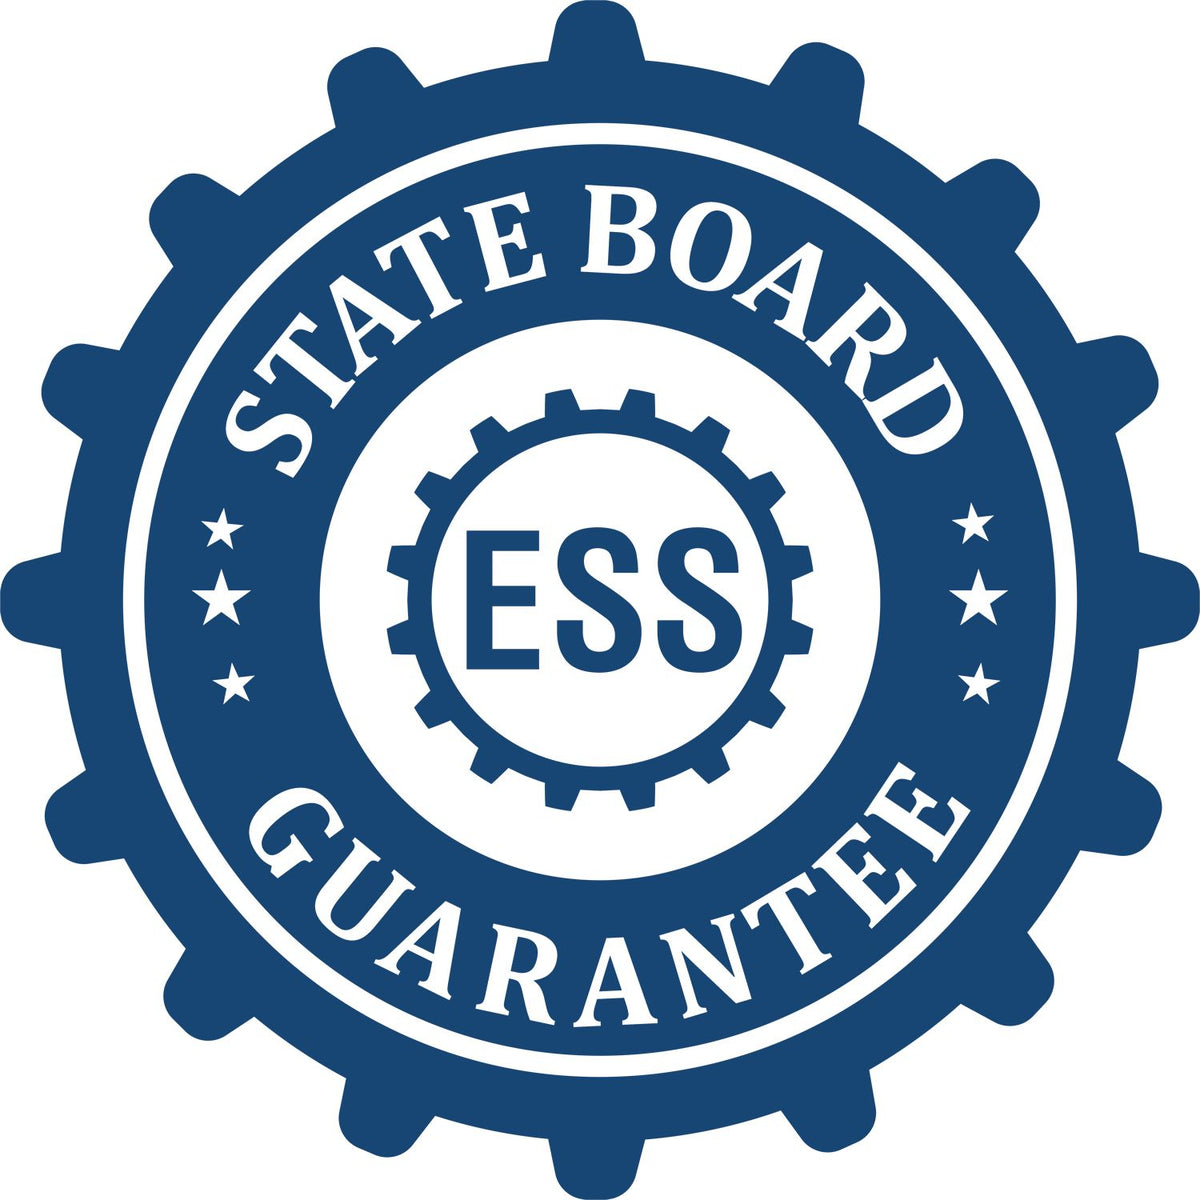 An emblem in a gear shape illustrating a state board guarantee for the Handheld Georgia Land Surveyor Seal product.